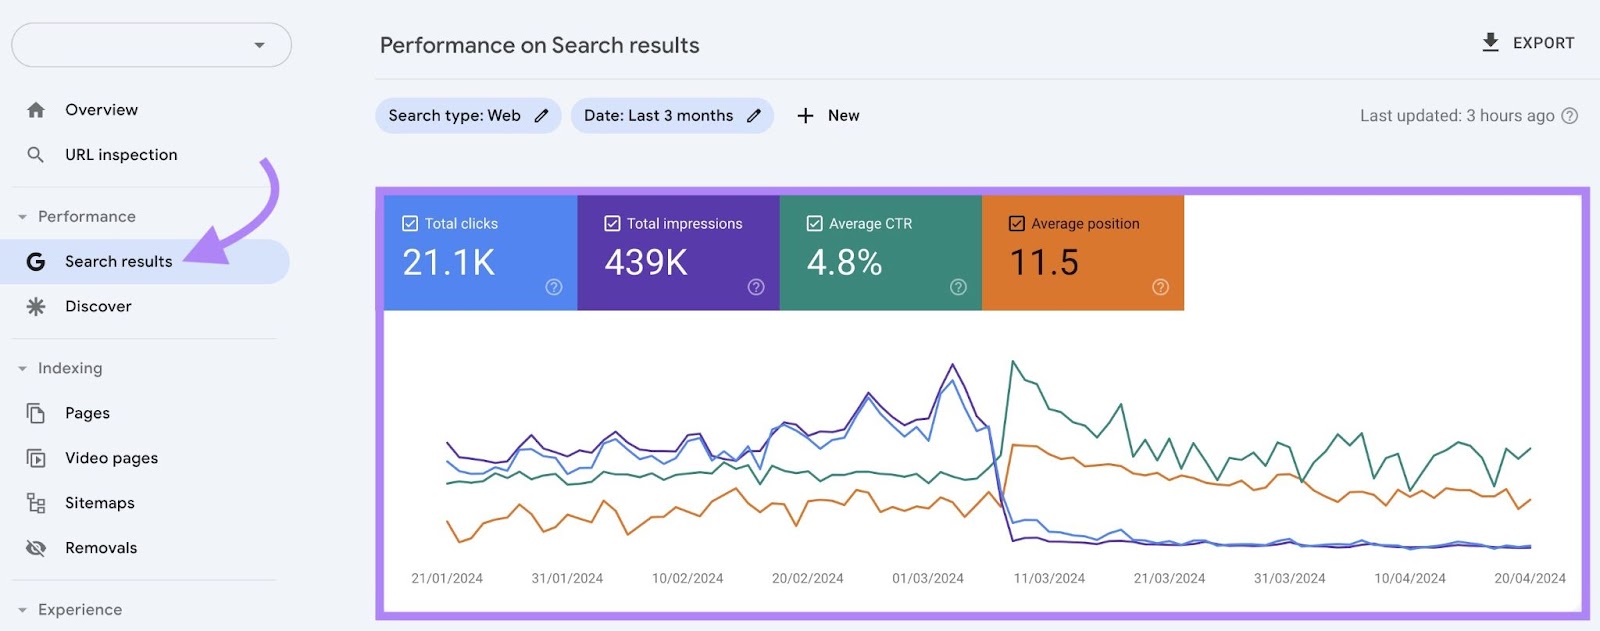 Performance on search results report shows a line chart with clicks, impressions, average CTR, and average position over the last three months